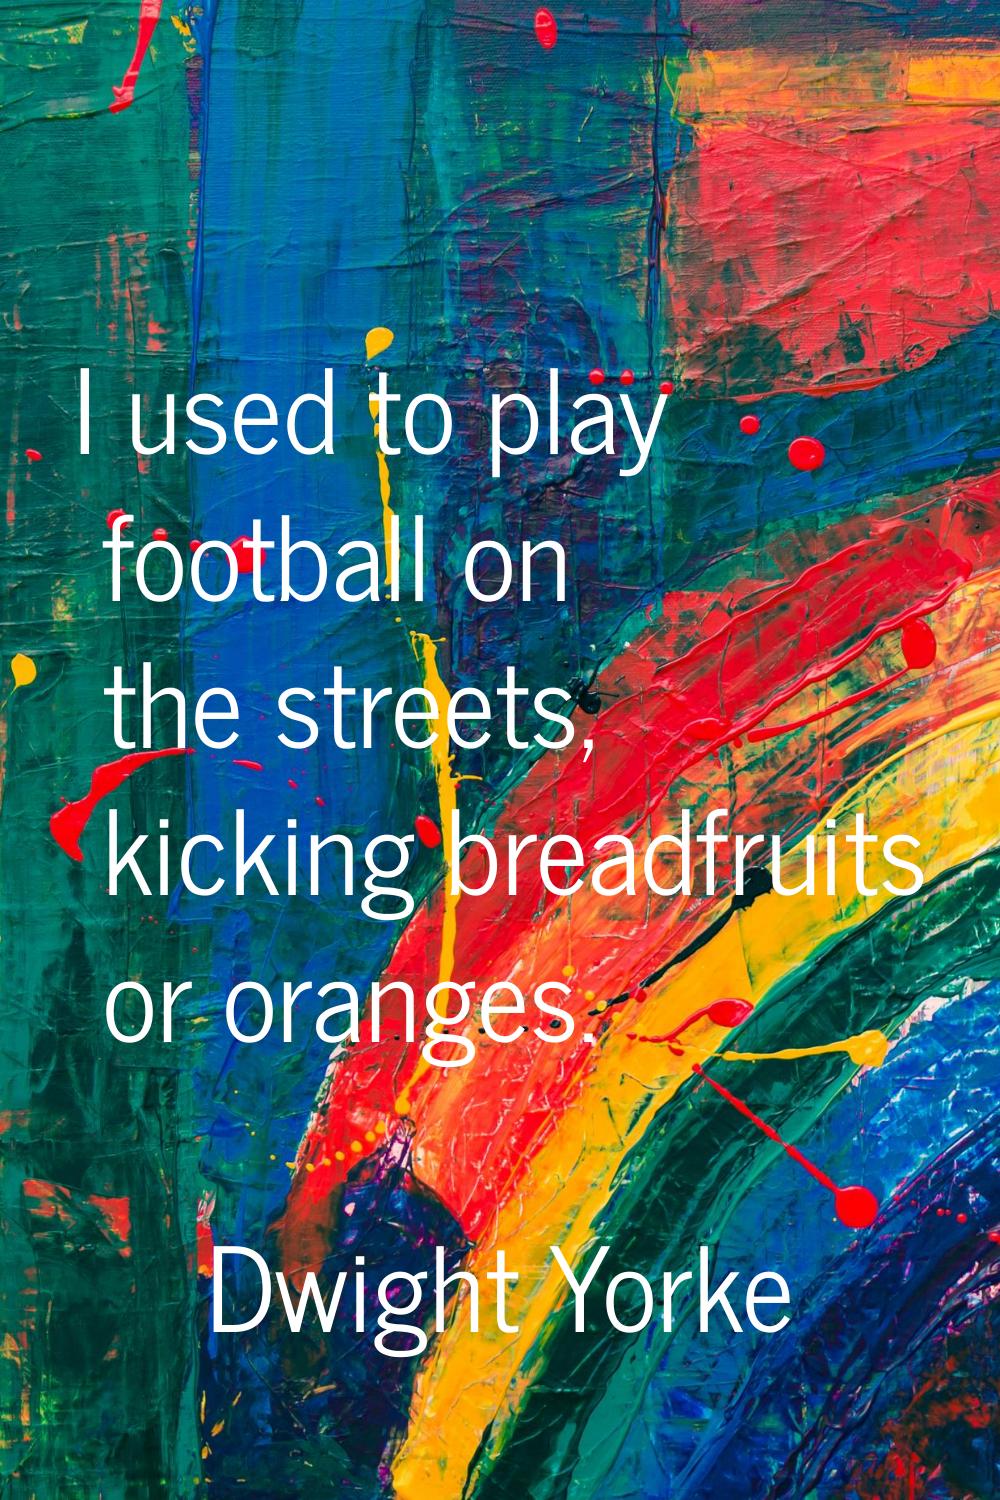 I used to play football on the streets, kicking breadfruits or oranges.